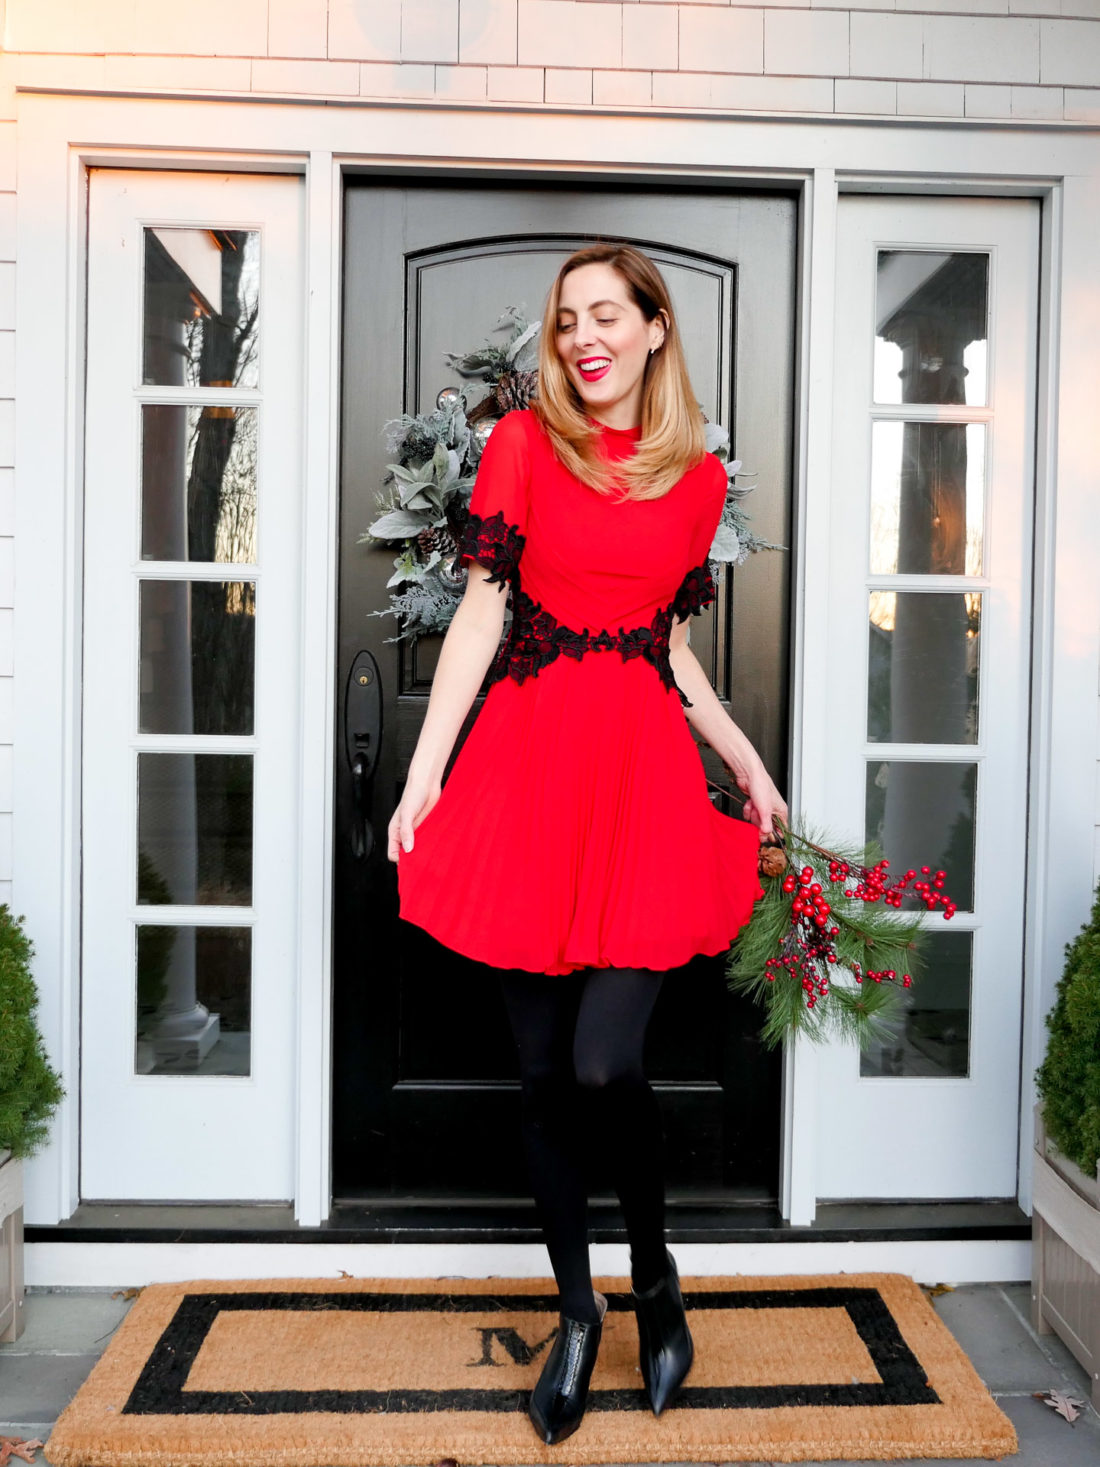 Eva Amurri Martino wears a red holiday party dress with black lace detailing, and stands in front of her Connecticut home